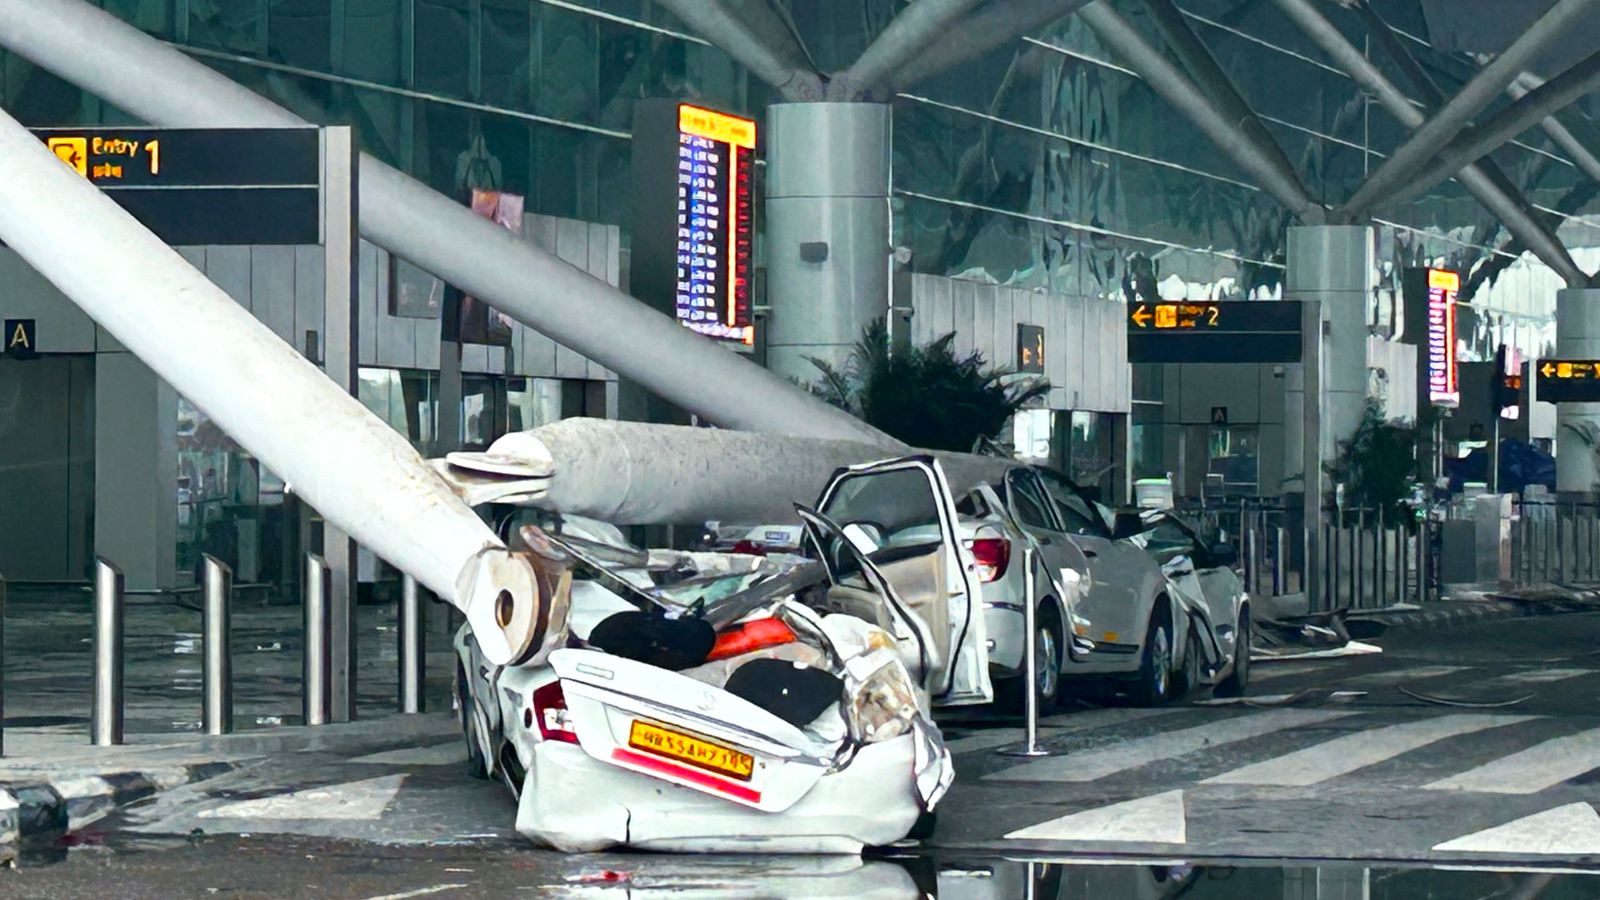 Roof partially collapses at New Delhi airport leaving one dead and six injured